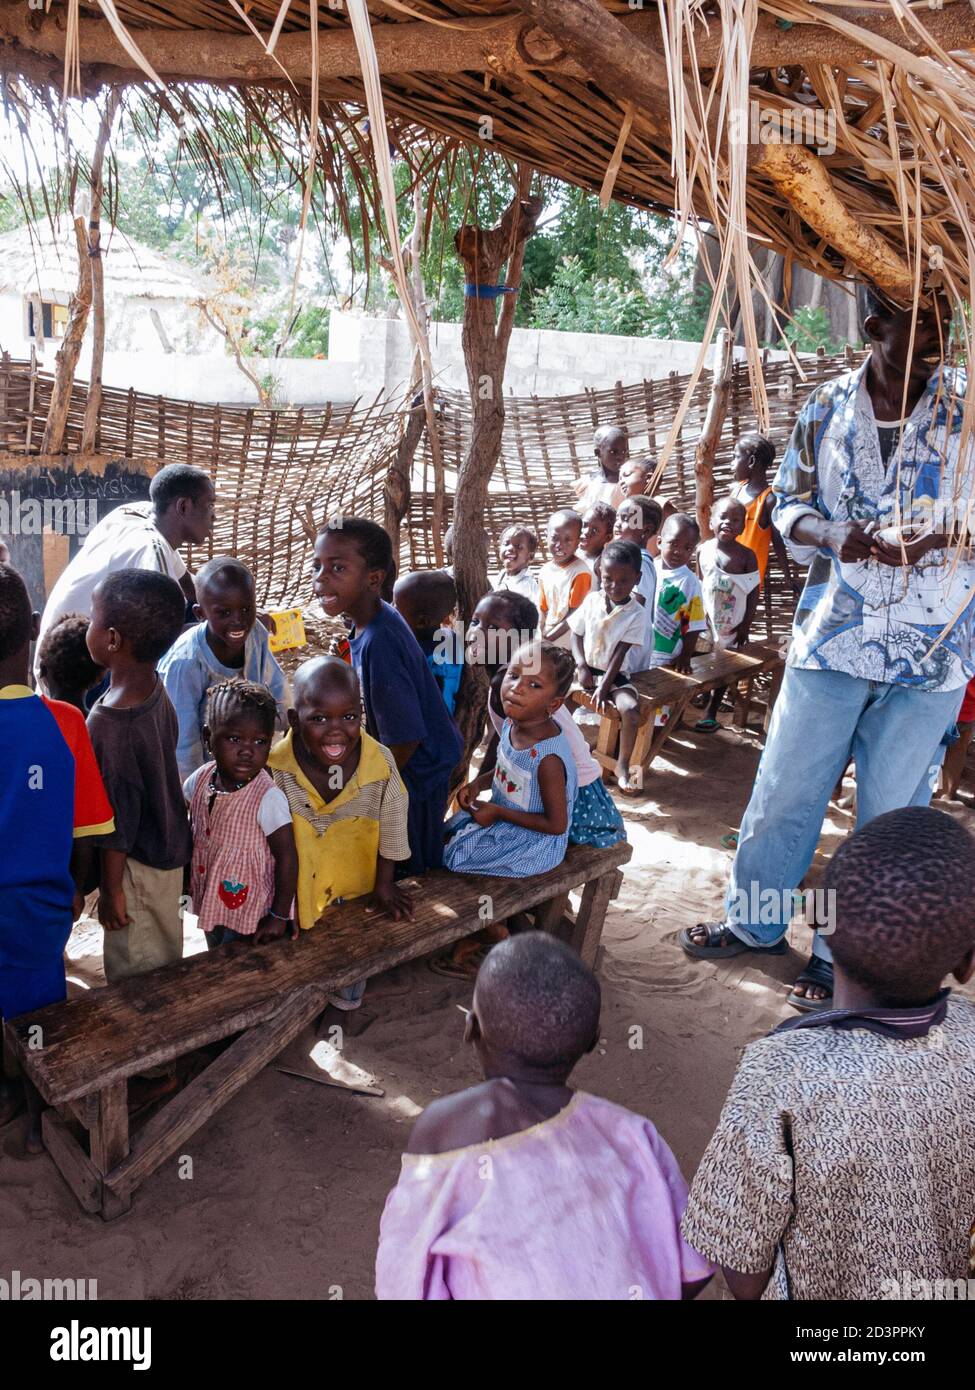 Children at The Roots Nursery School in Jufureh, The Gambia Stock Photo